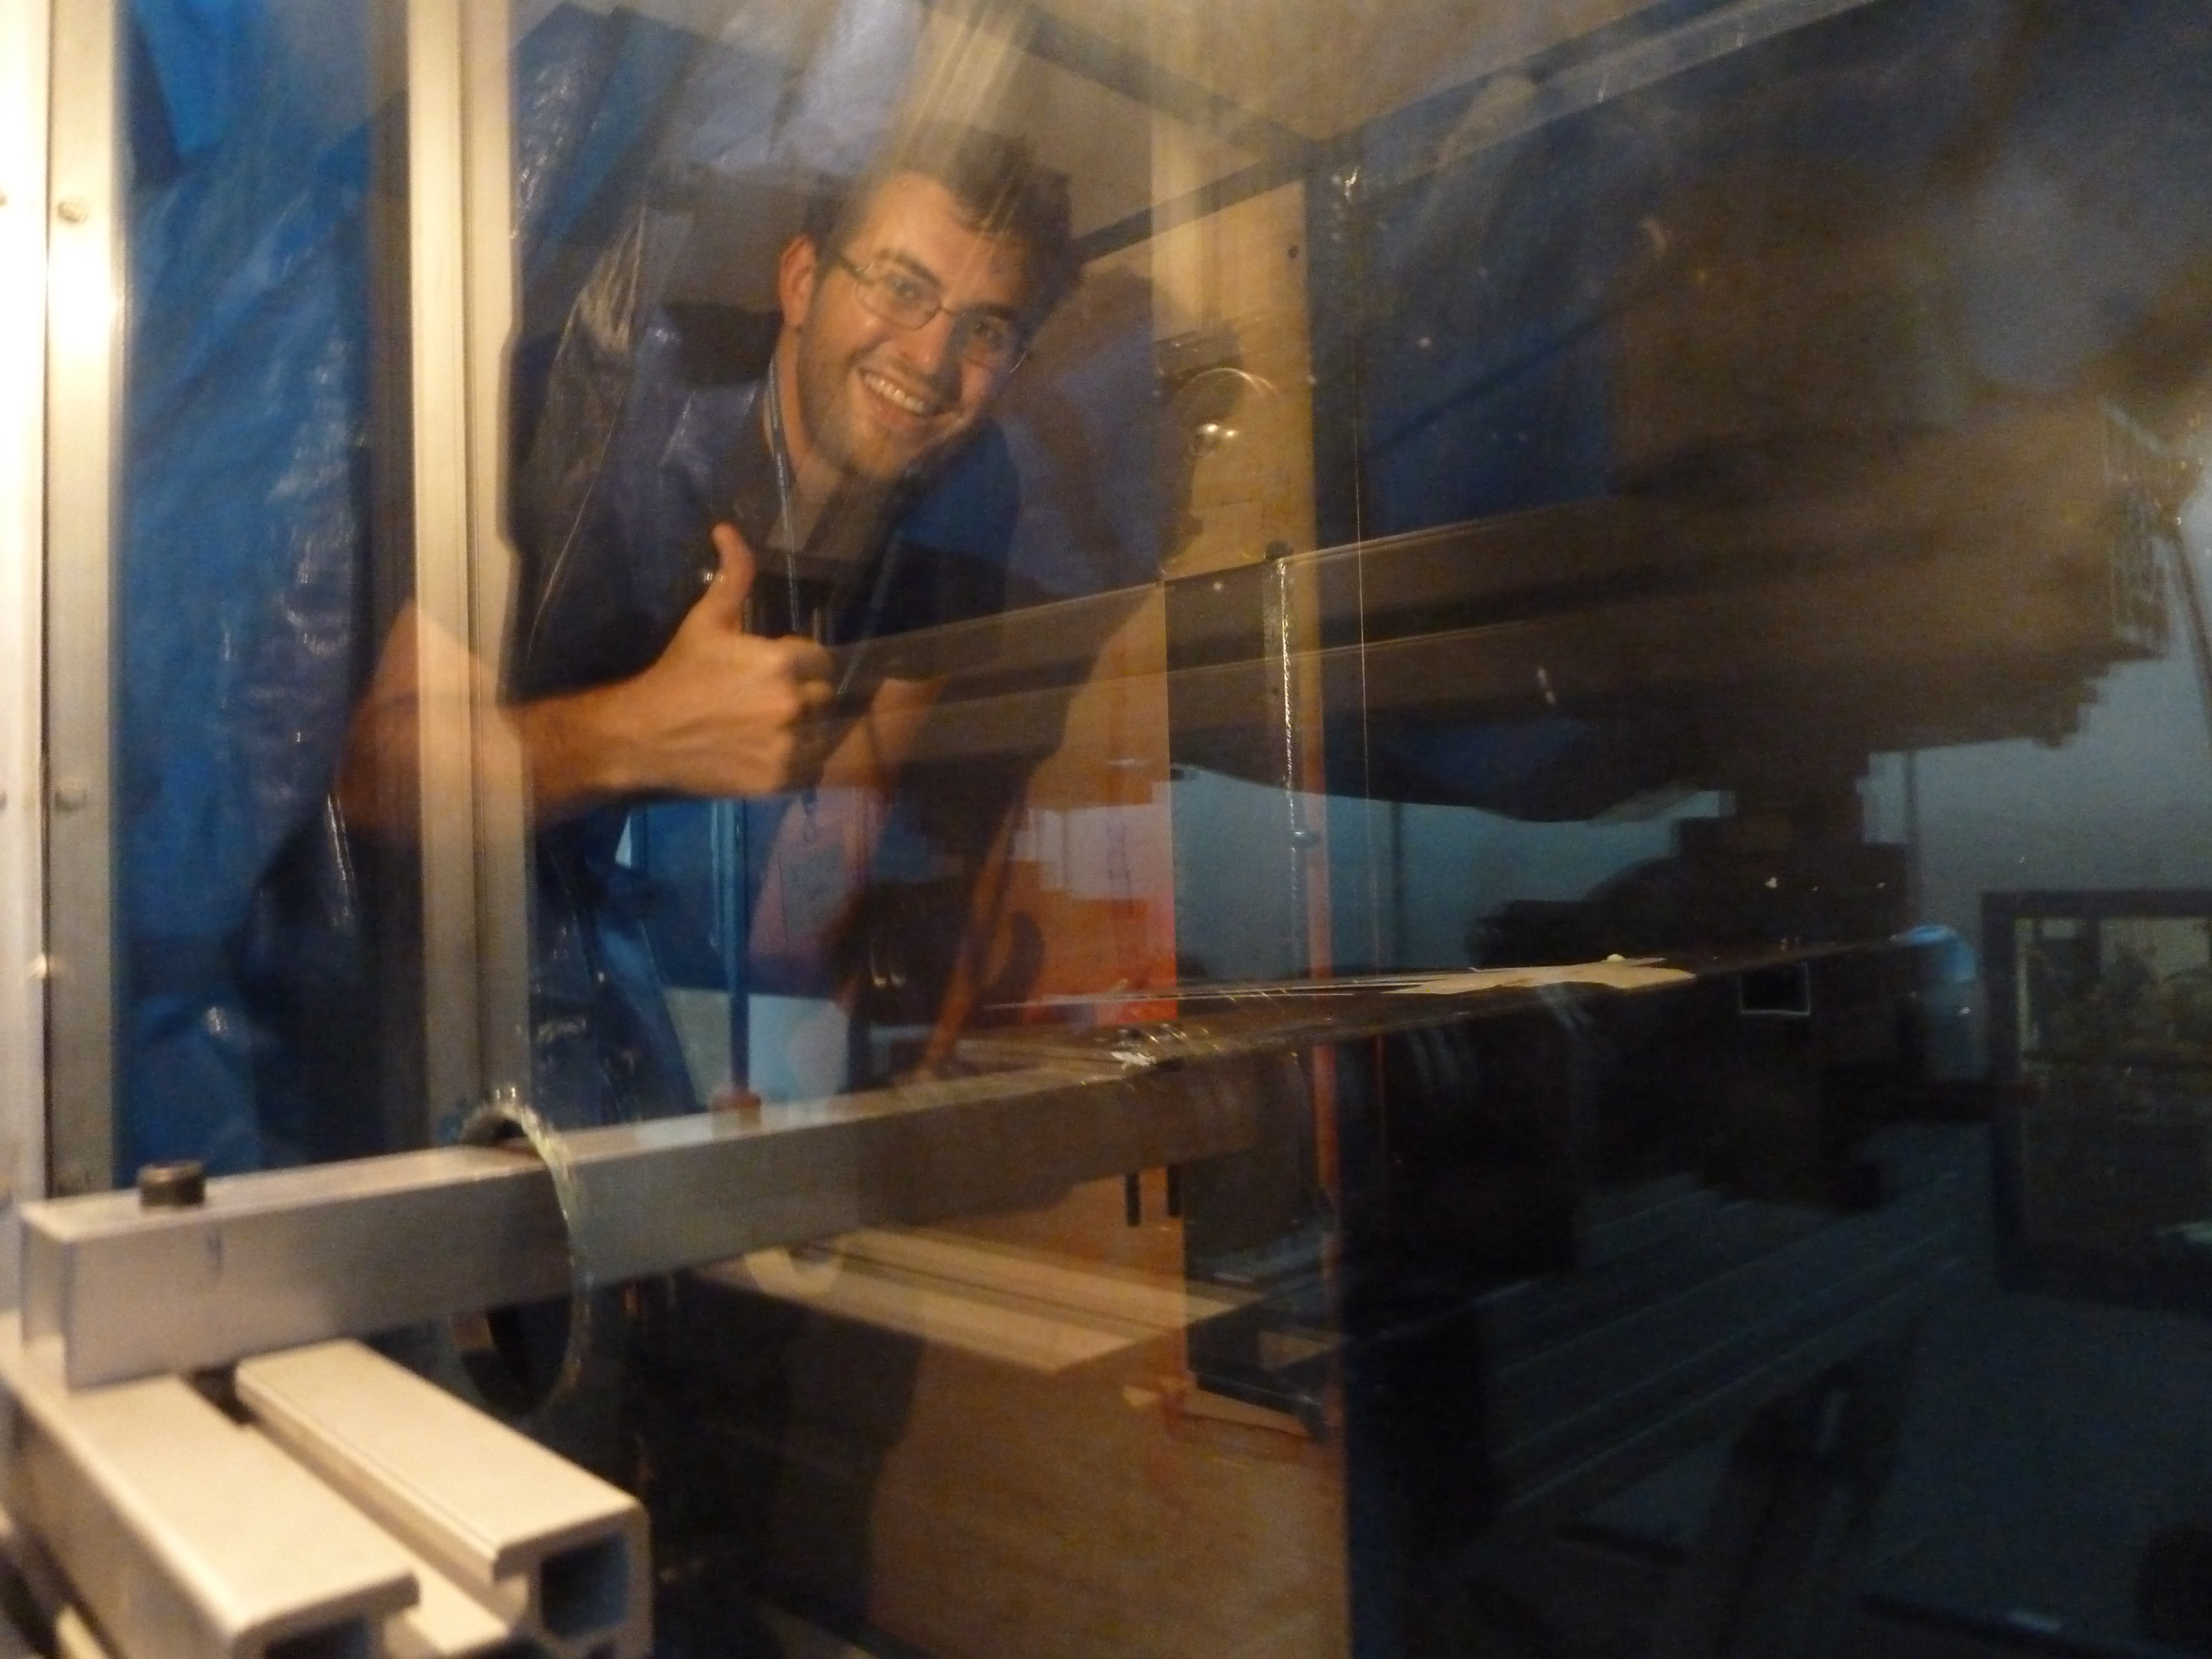 Chad at the Polytecnic di Milano Wind Tunnel on his trip funded by the Sigma Xi travel grant